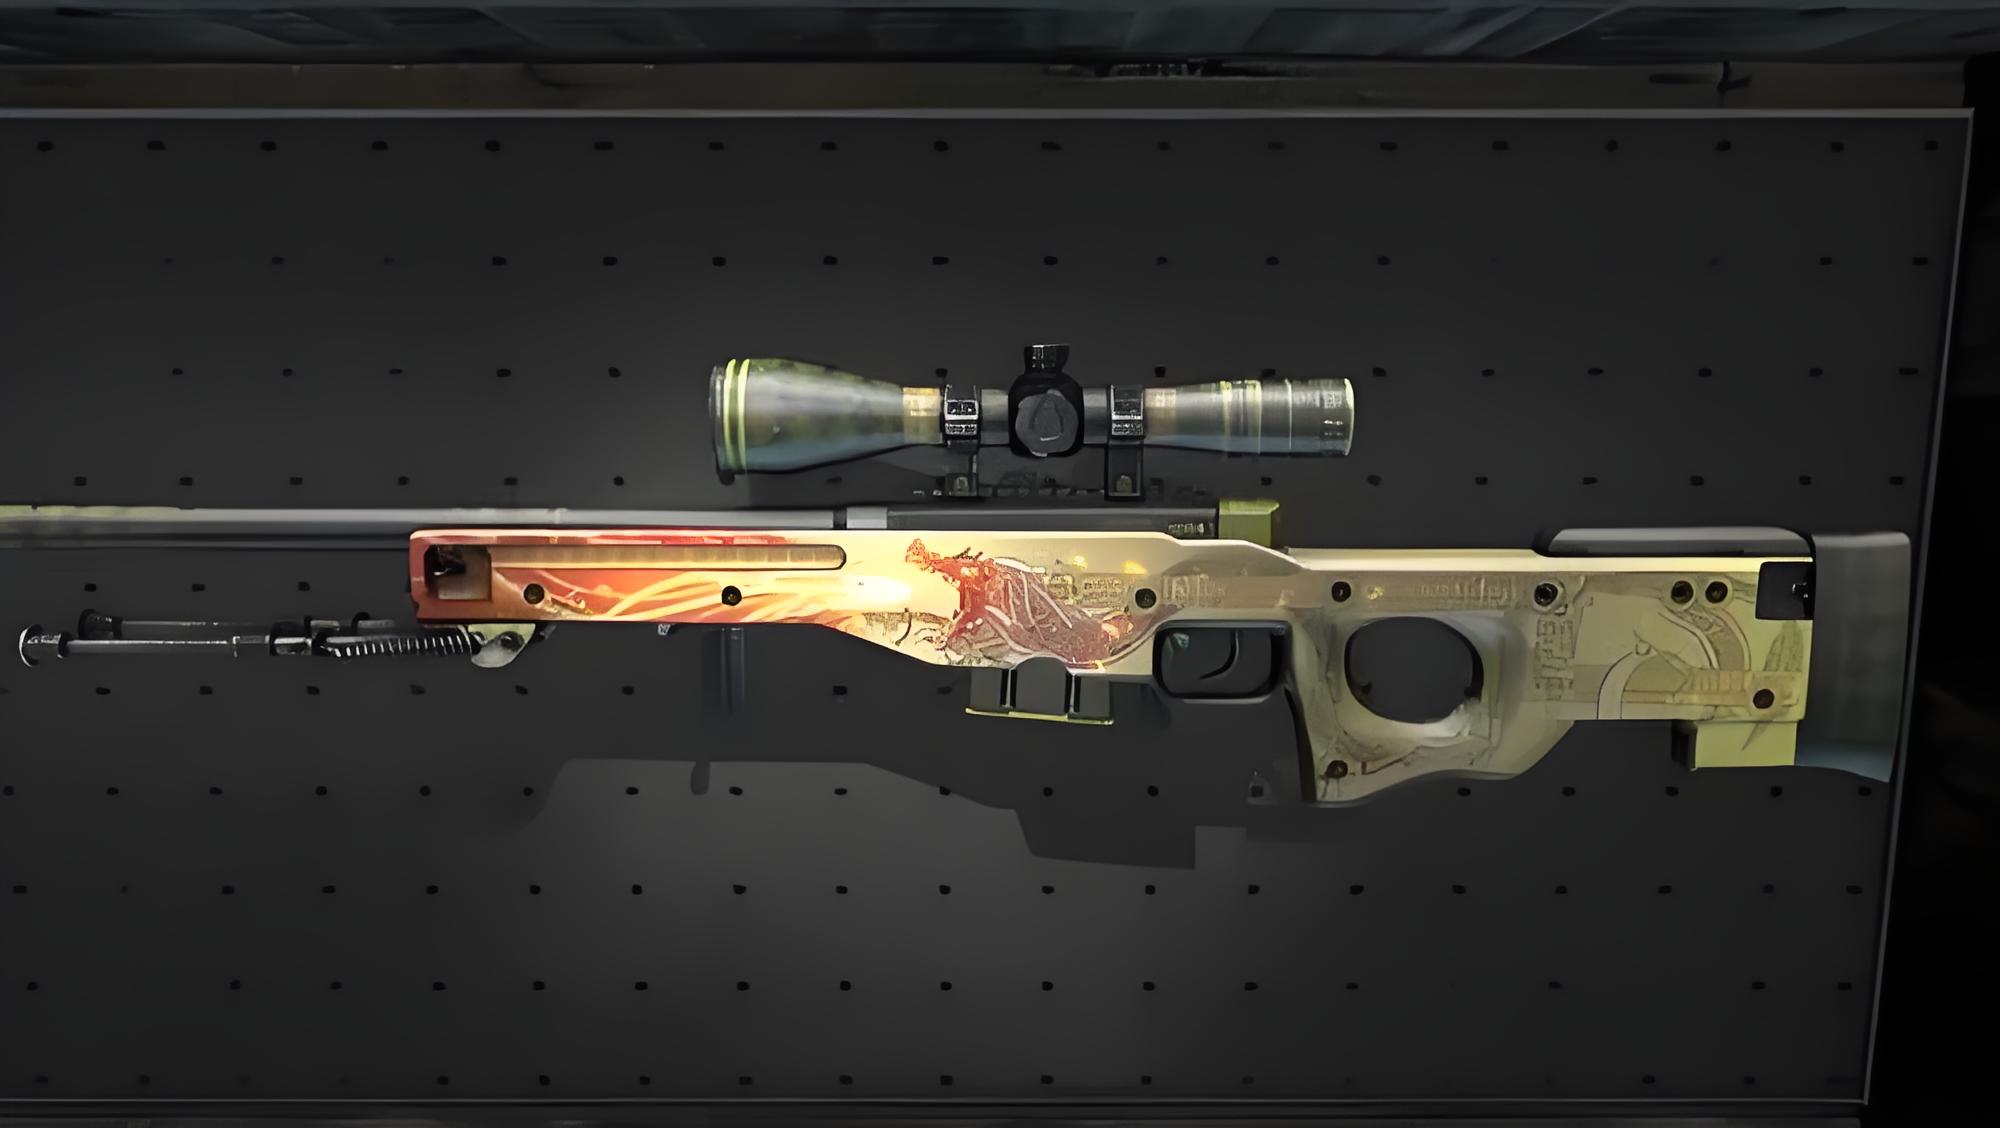 How will the skins stolen from CSGO wear out? (Will the skin guns in CSGO wear out when used?)